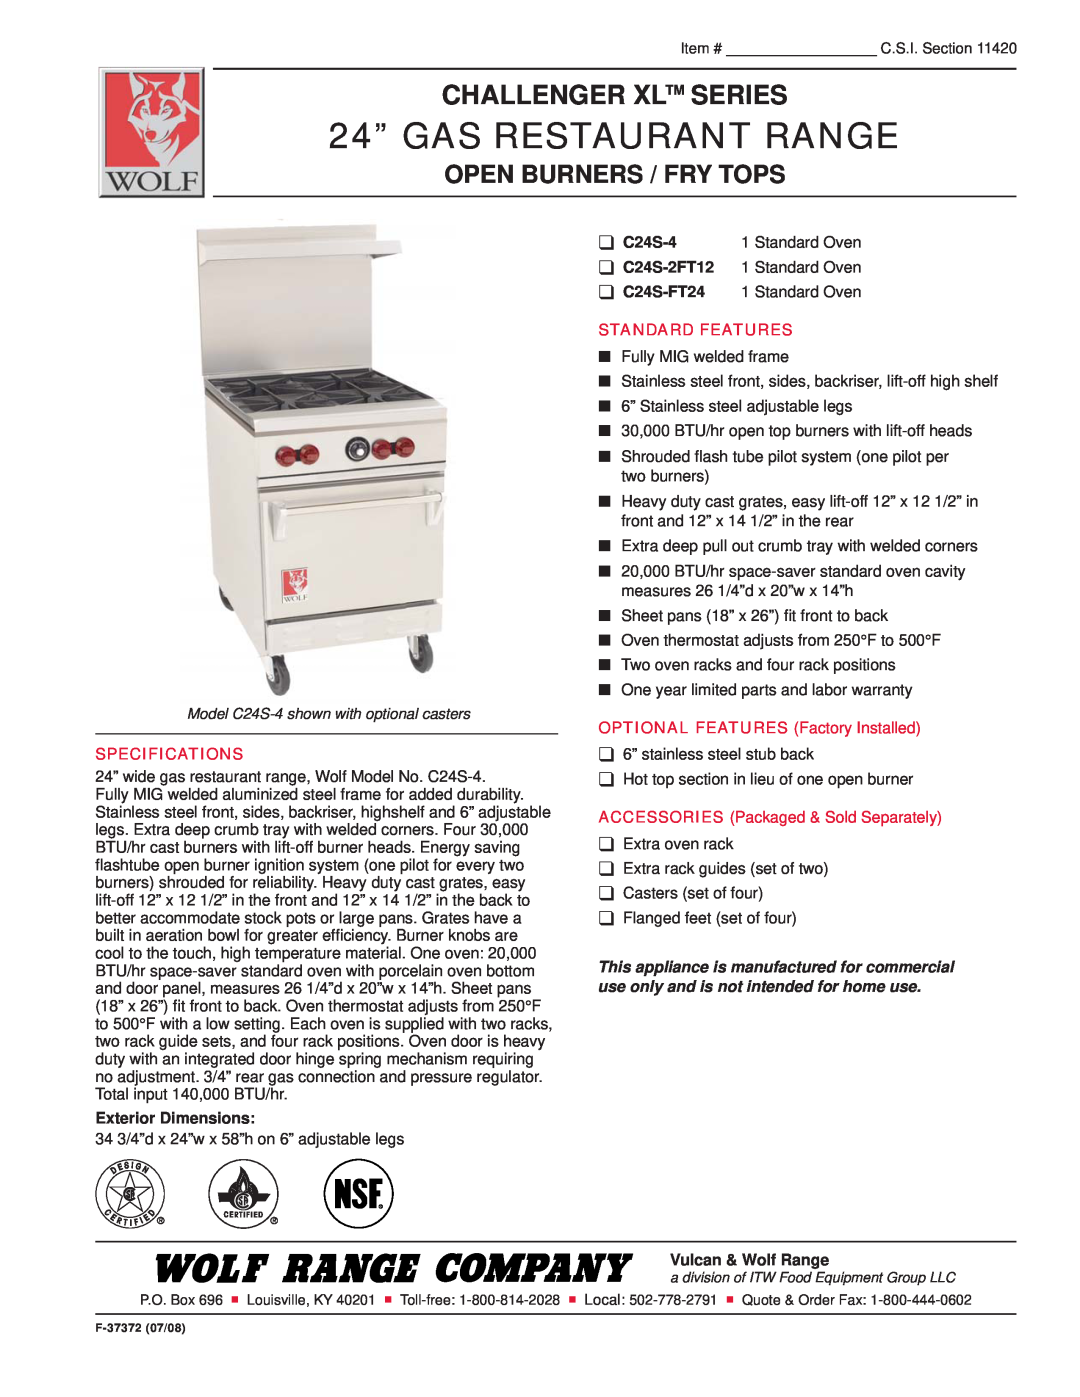 Wolf C24S-FT24 specifications 24” GAS RESTAURANT RANGE, Challenger Xl Series, Open Burners / Fry Tops, Specifications 